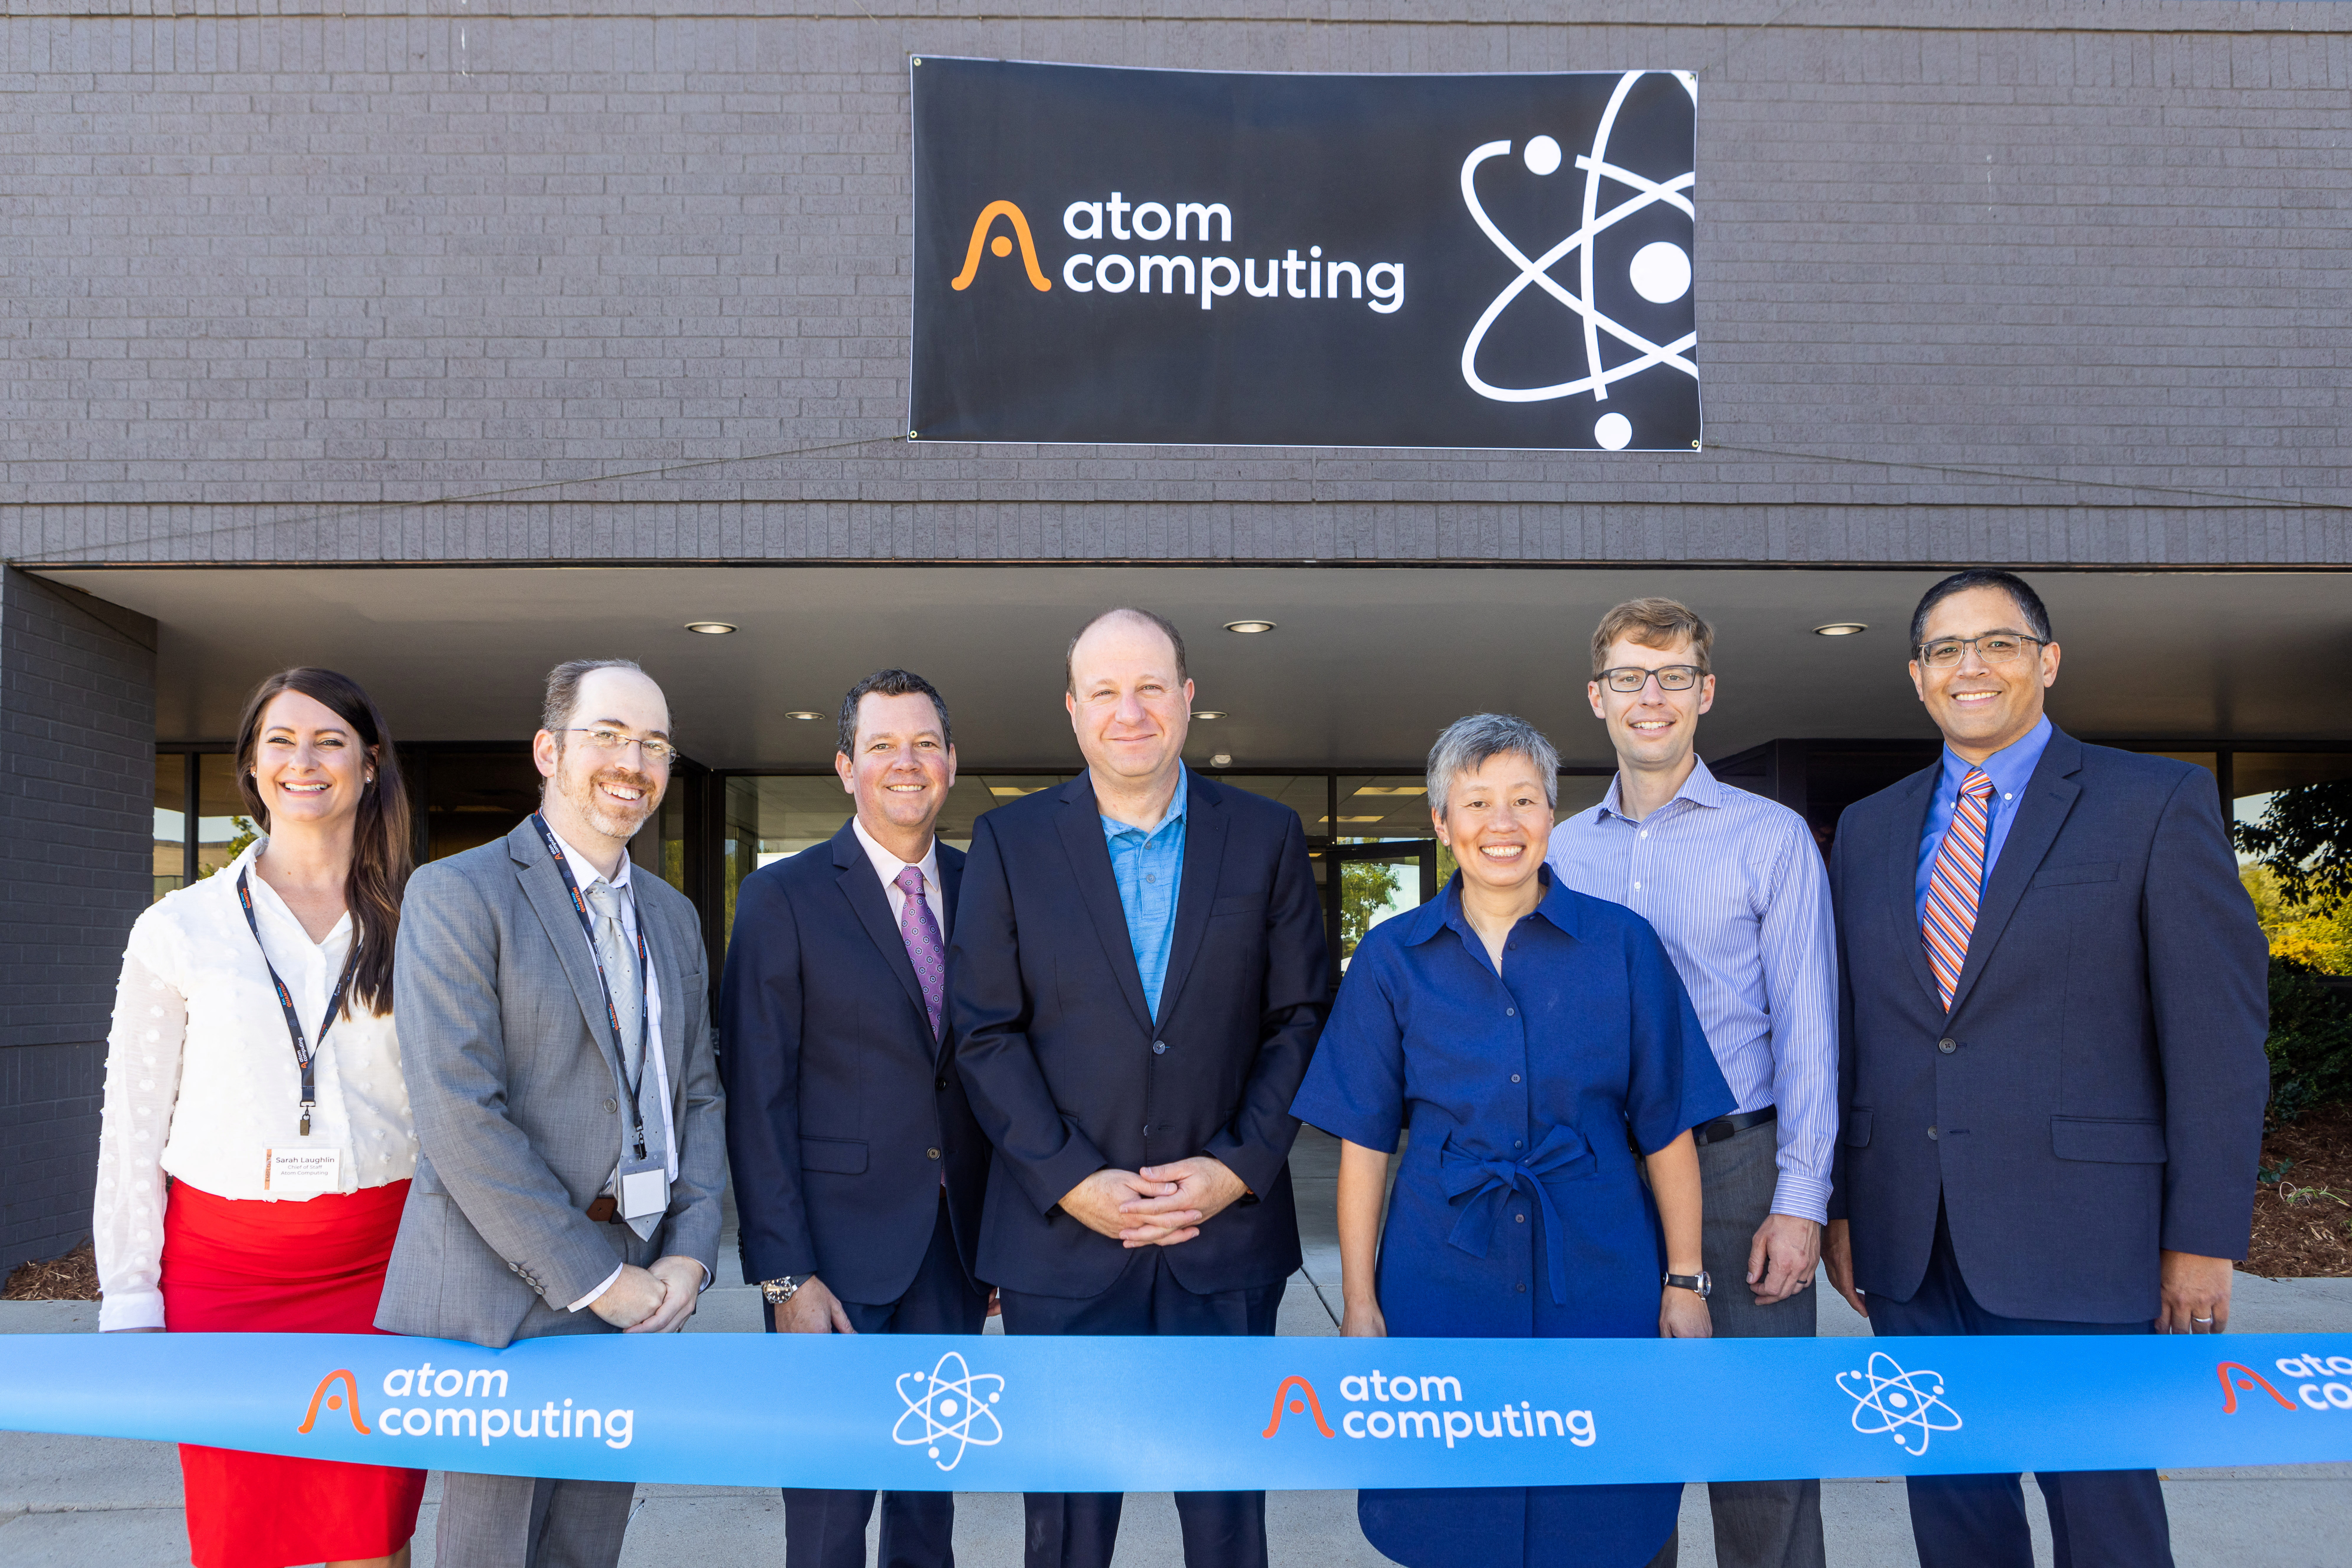 Colorado Governor Jared Polis attended the opening ceremony of Atom Computing's new facility in Boulder, Colorado